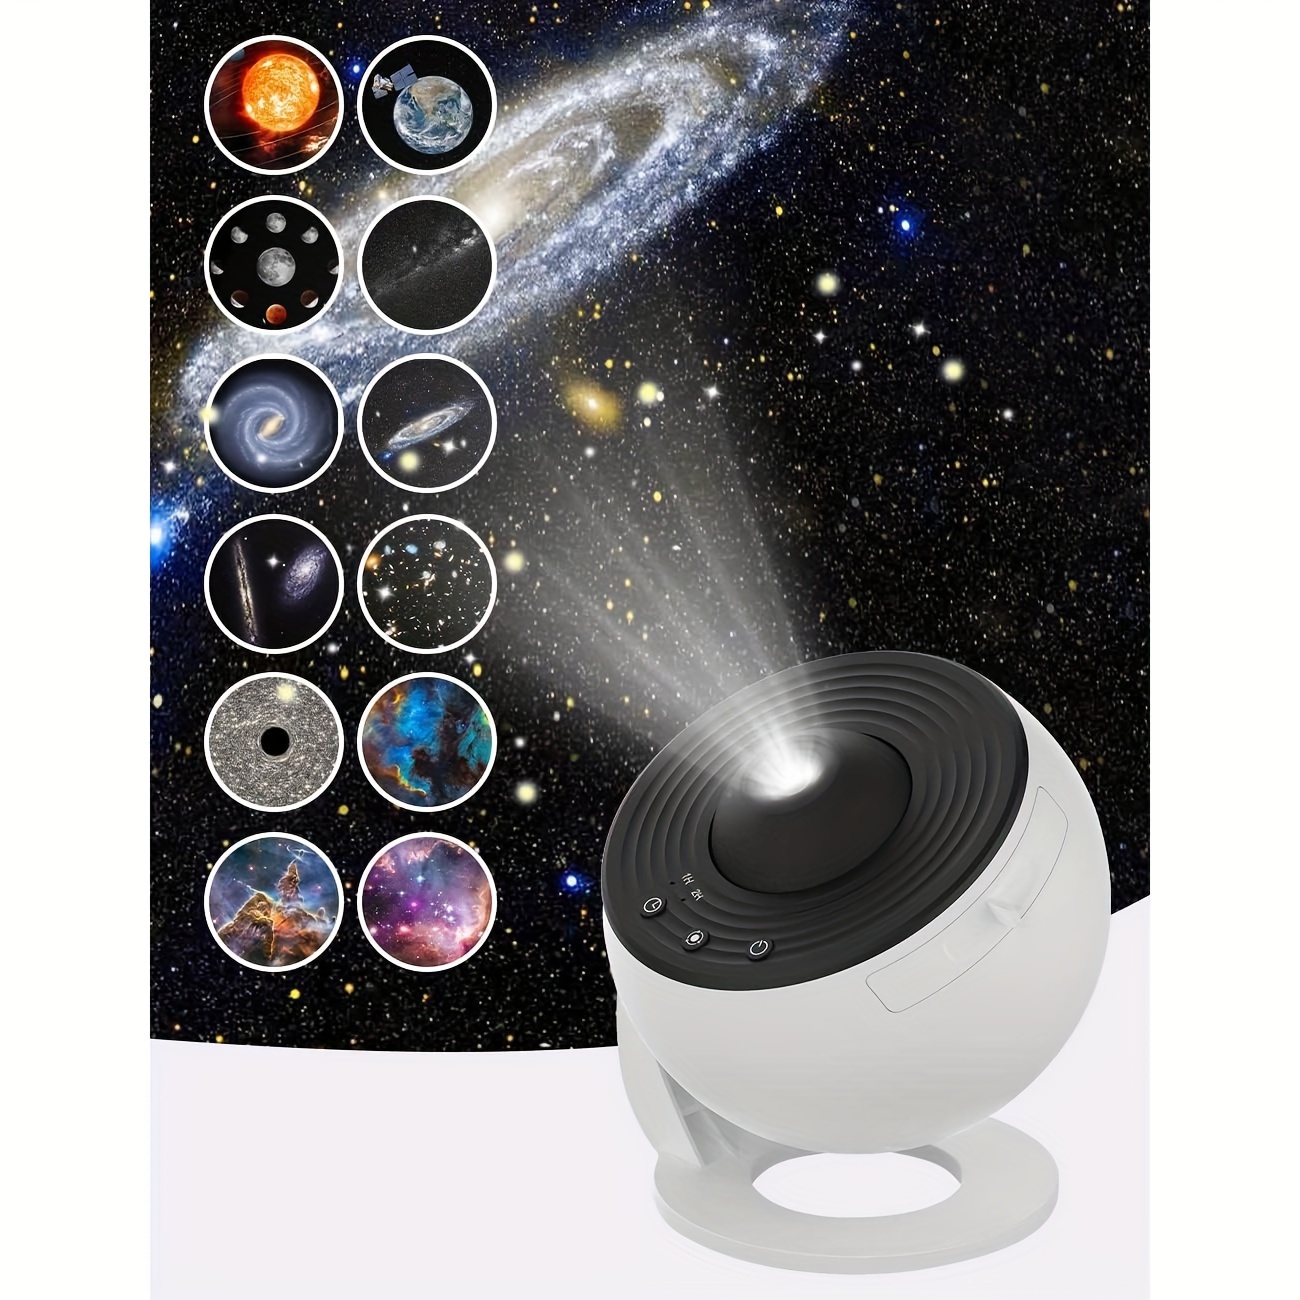 

13 In 1 Planetarium Galaxy Star Projector For Bedroom Decor, 360° Rotating Nebula Projector Lamp, Timed Starry Night Light Projector, Home Theater, Ceiling, Room Decoration